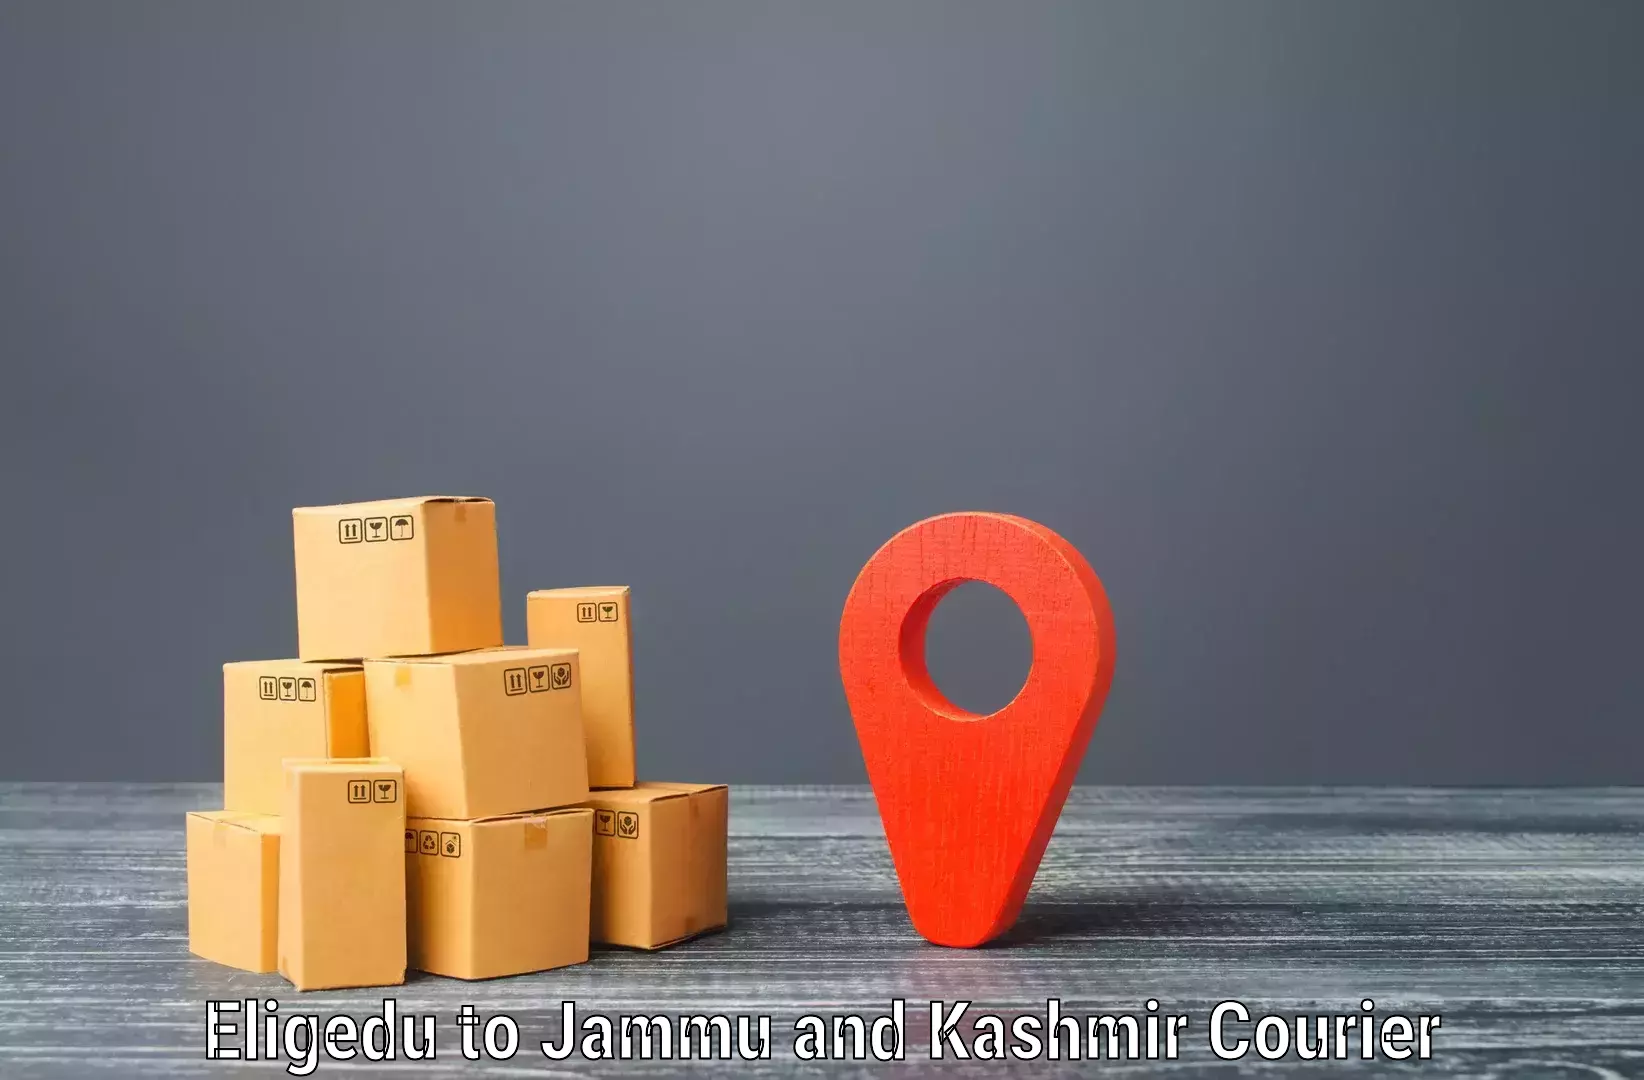 Residential courier service Eligedu to Jakh